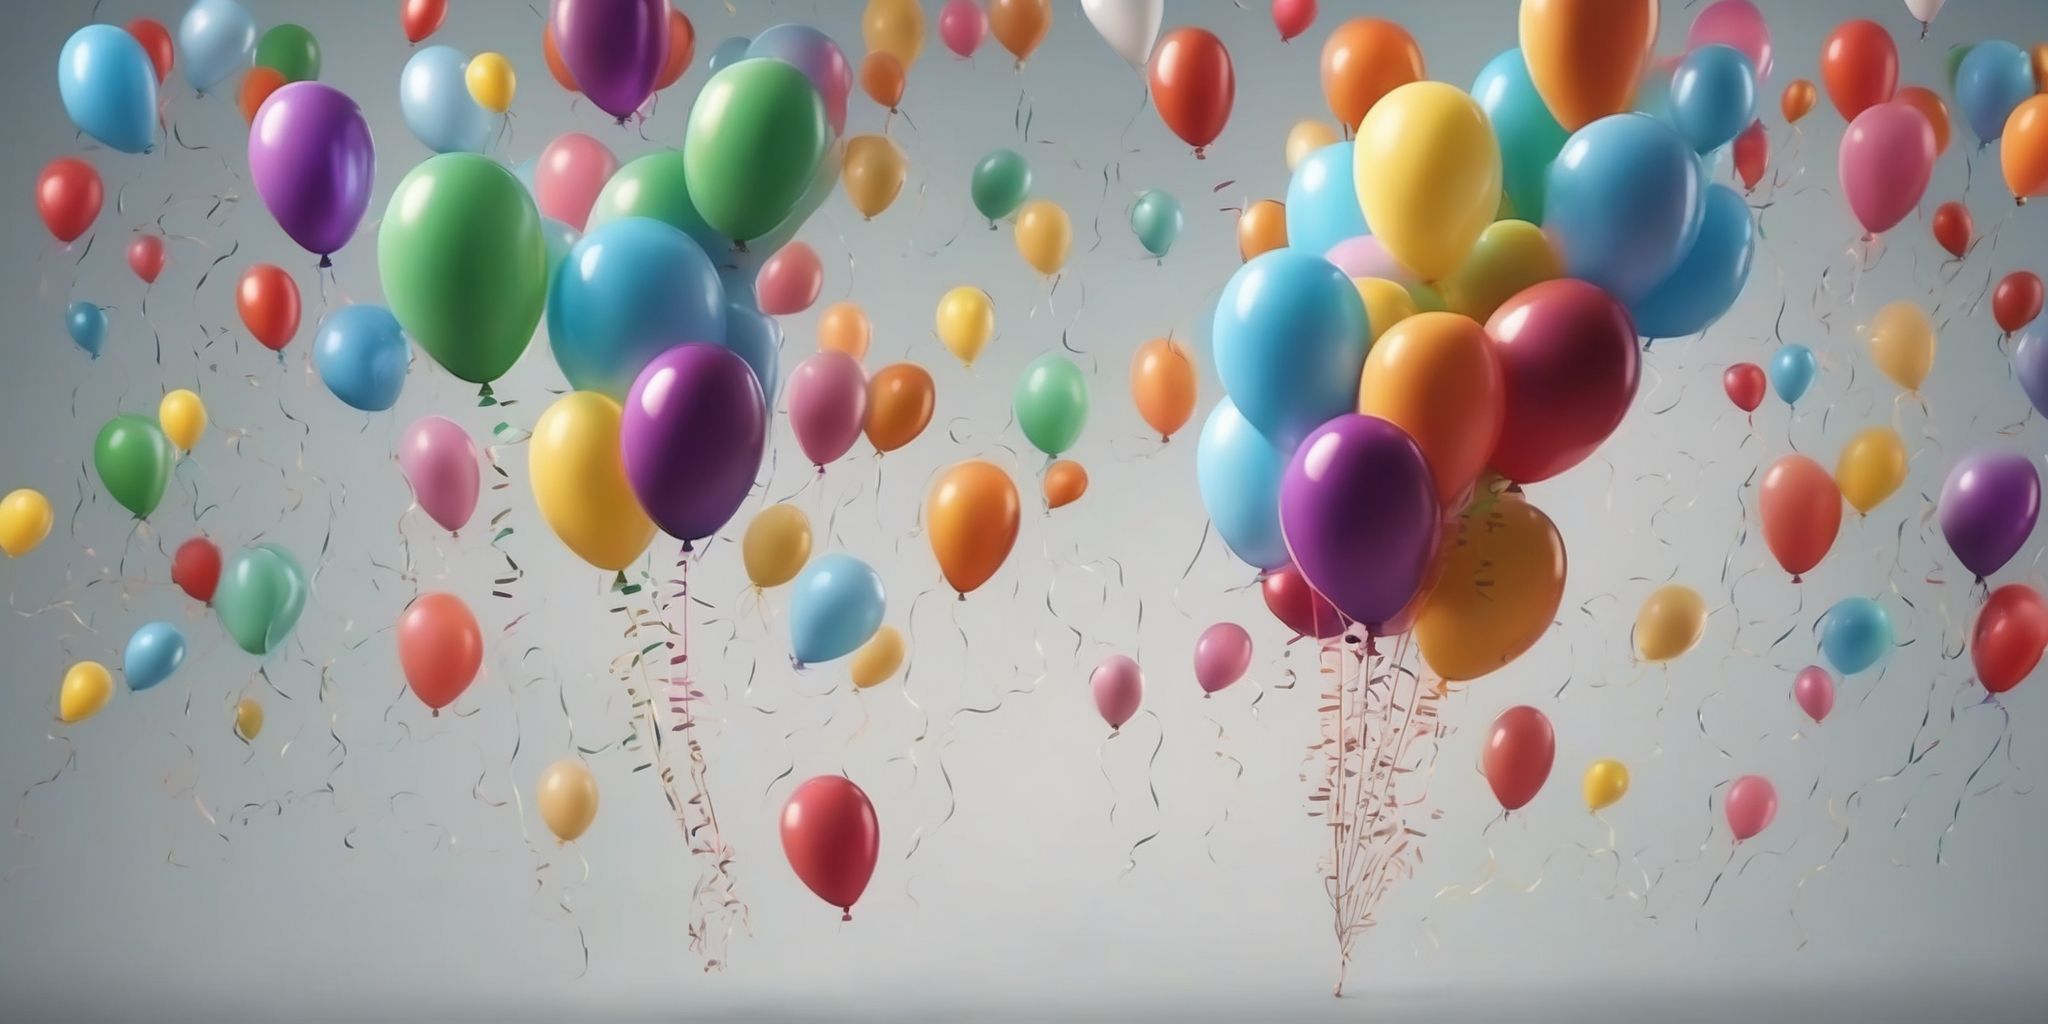 Balloons  in realistic, photographic style